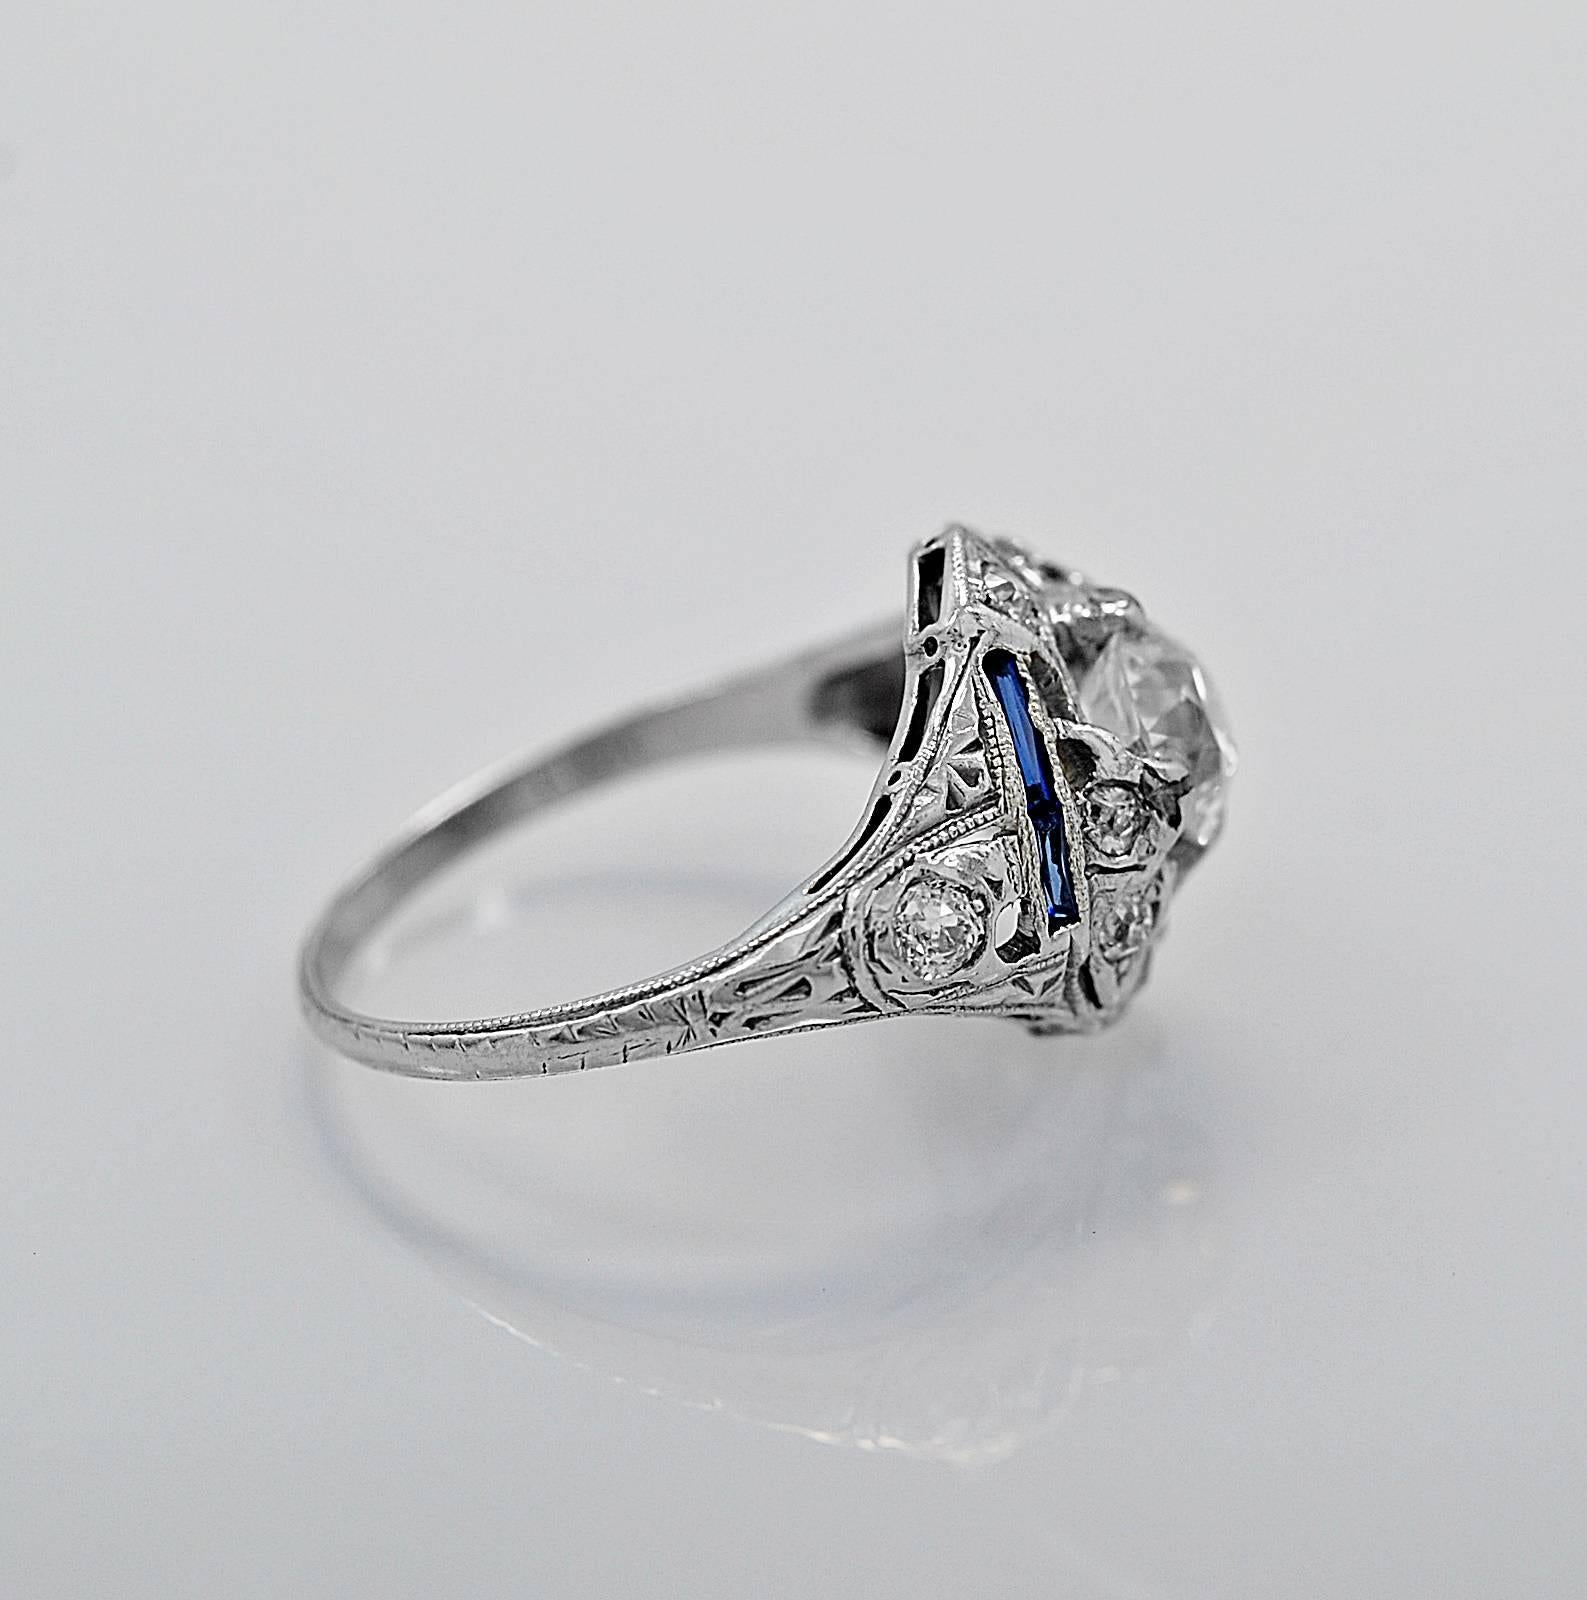 This is an absolutely beautiful antique engagement ring featuring a .82ct. apx. European cut center diamond with SI2 clarity and K color. It also has an accenting .24ct. apx. T.W. of European cut diamonds that are delicately outlined with milgrain.